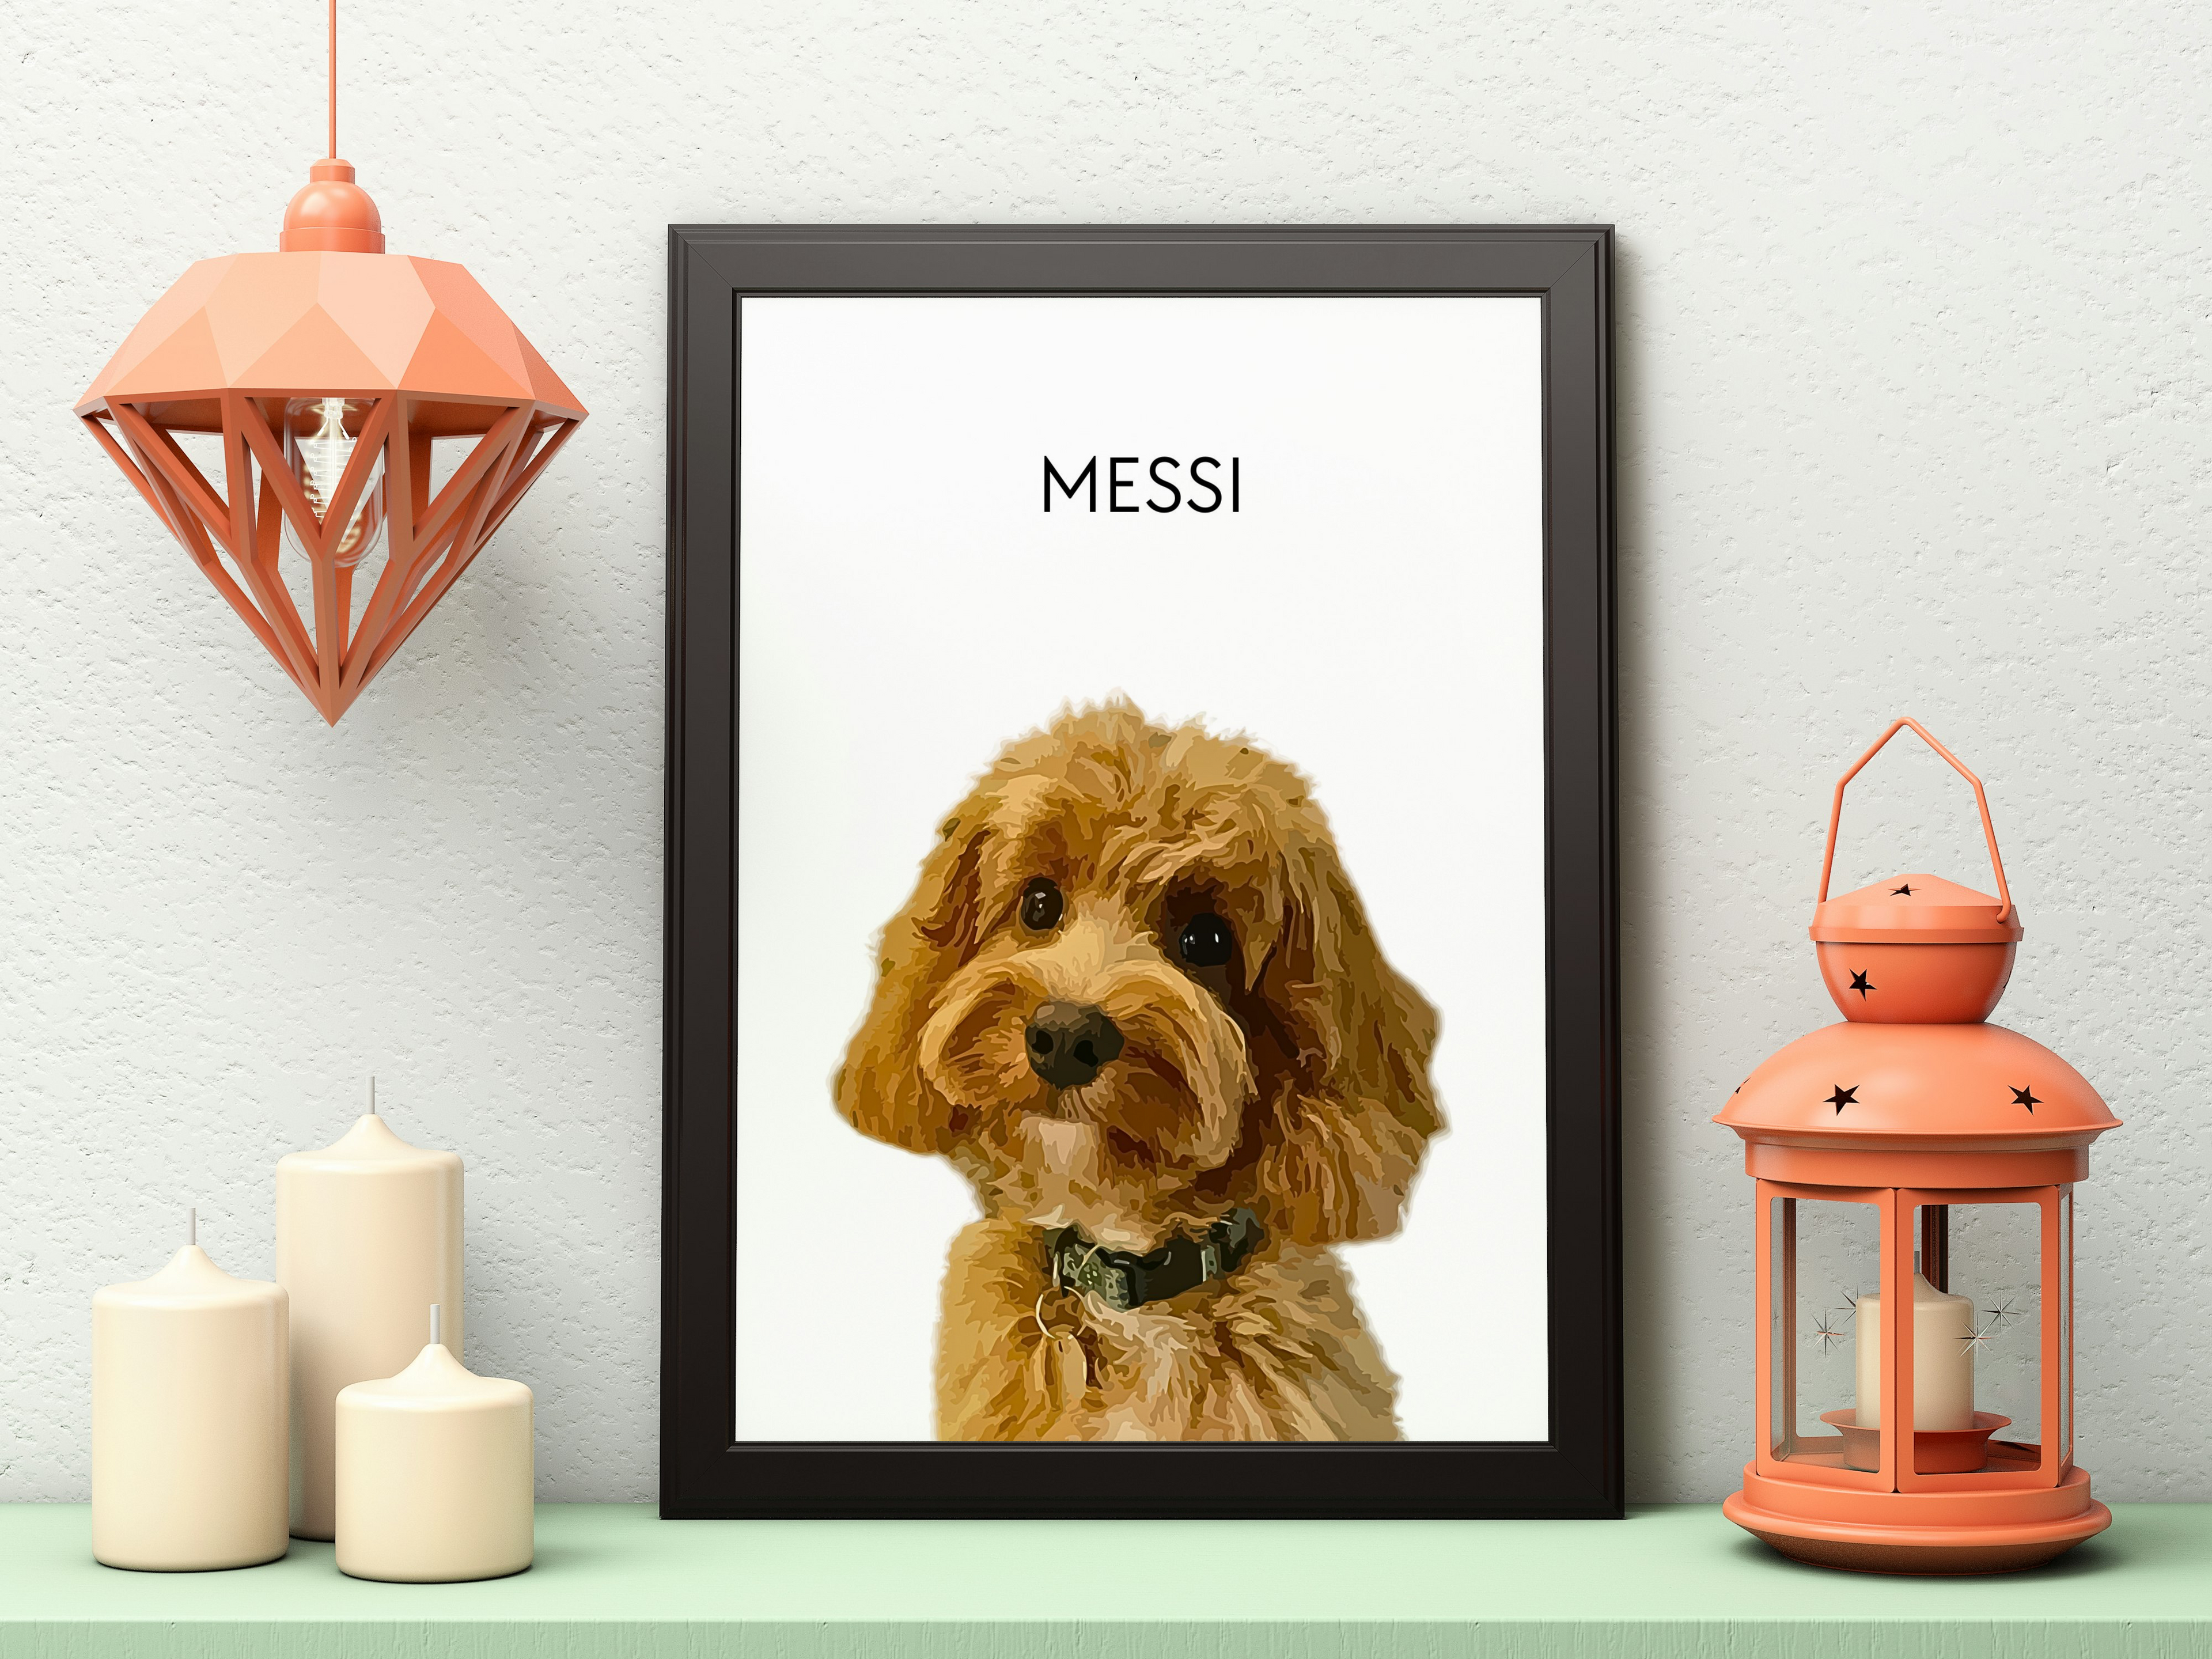 Product shot of a minimalistic Pet Portrait featuring a cavapoo called Messi produced by Fanaticelle